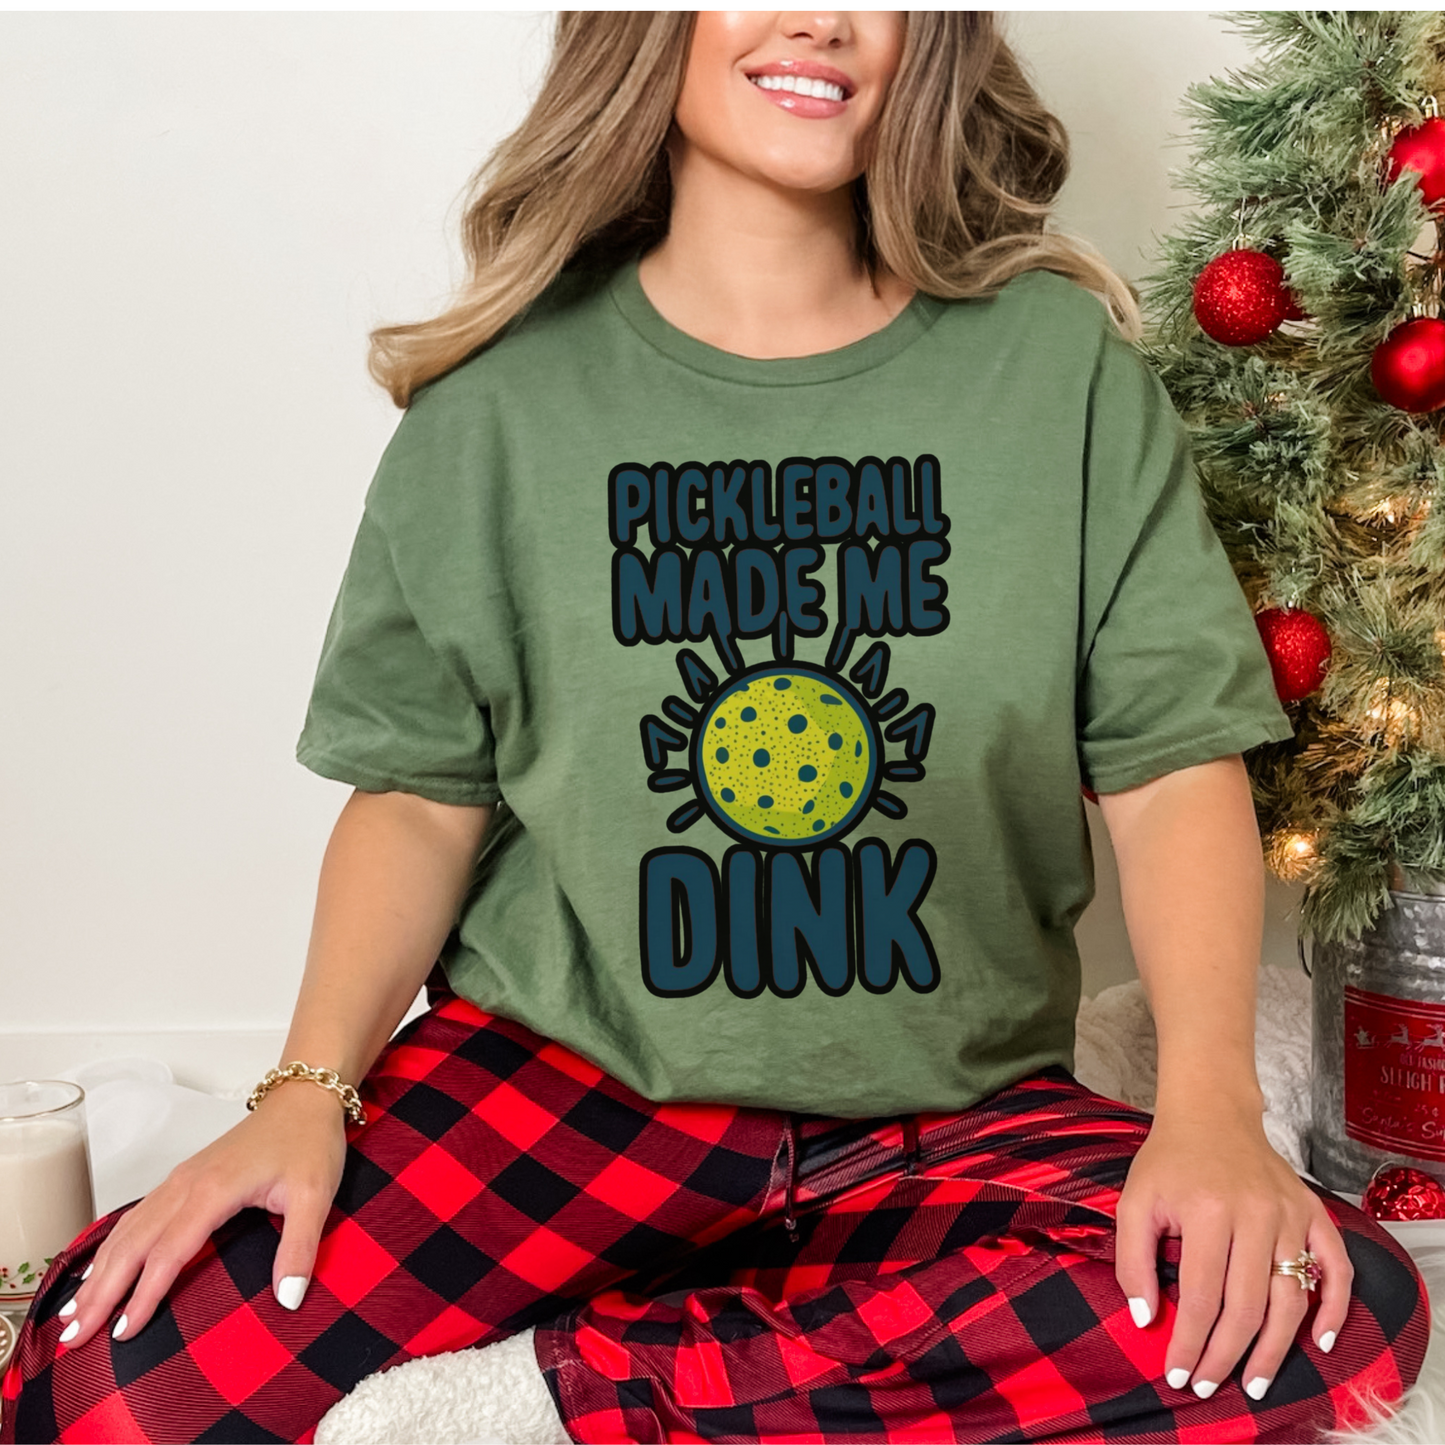 Pickleball Made Me Dink Tee with Exaggerated Pickleball Graphic, Pickleball Lover Tee, Pickleball Game Day, Pickleball ,Dink Pickleball Gift